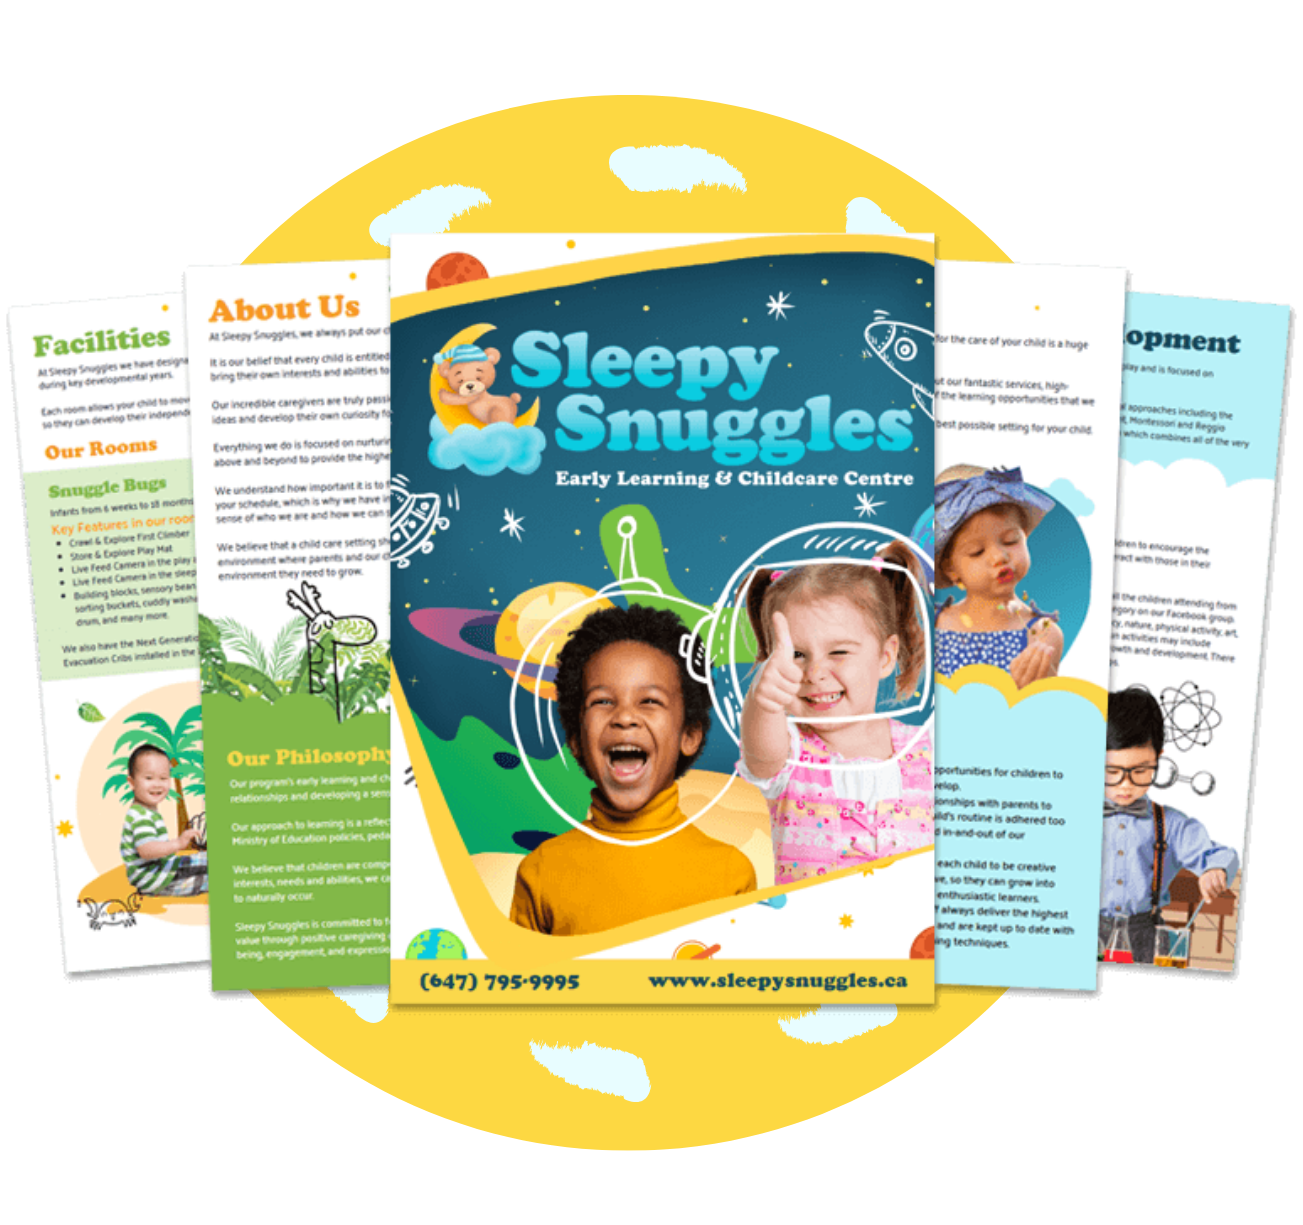 parent pack from Sleepy Snuggles